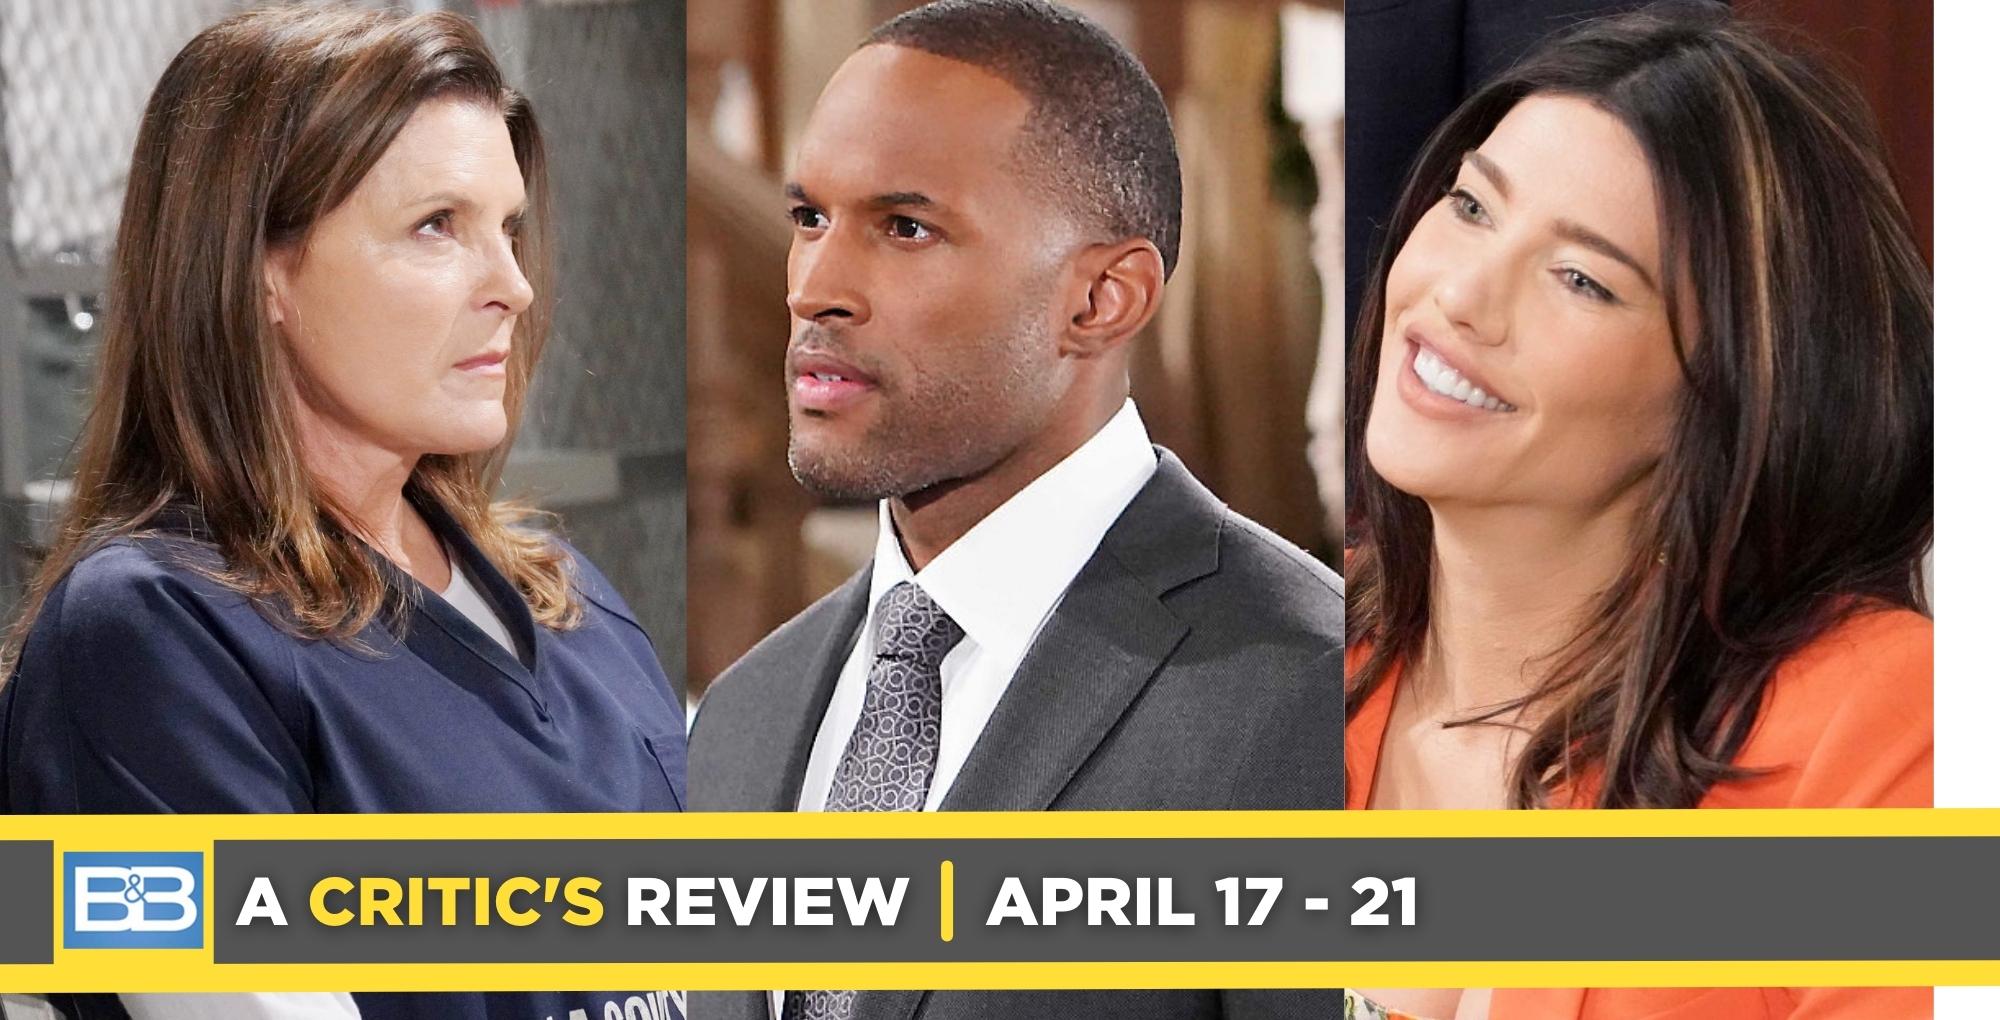 the bold and the beautiful critic's review for april 17 – april 21, 2023, three images sheila, carter, and steffy